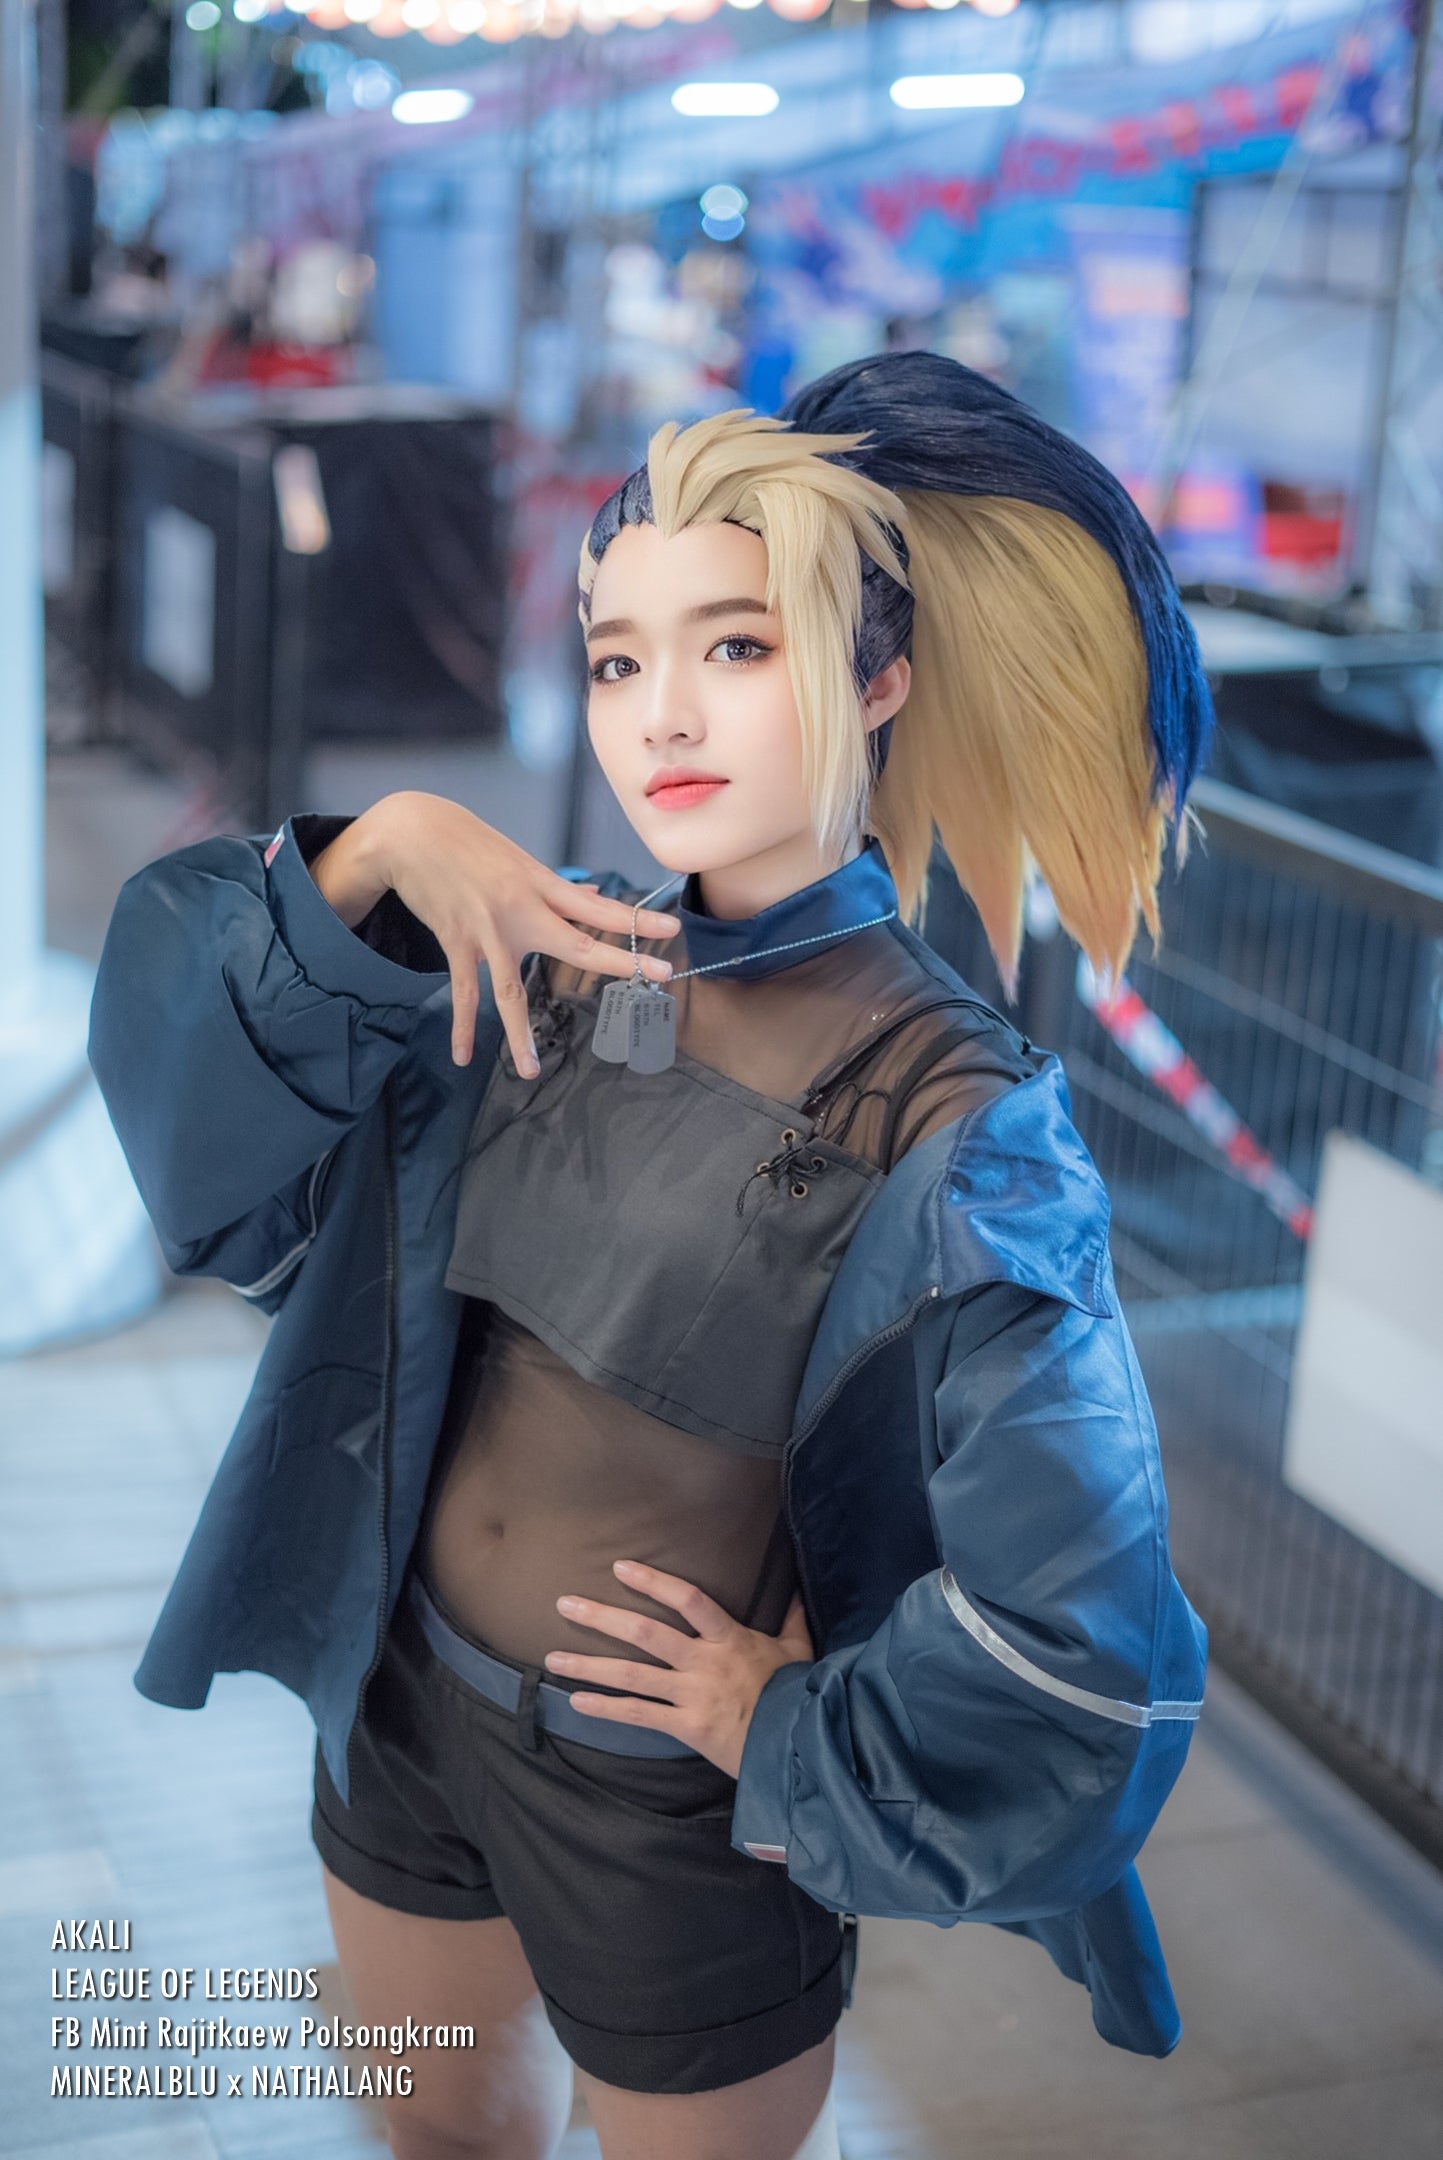 Our Favourite Cosplay From Japan Expo 2022